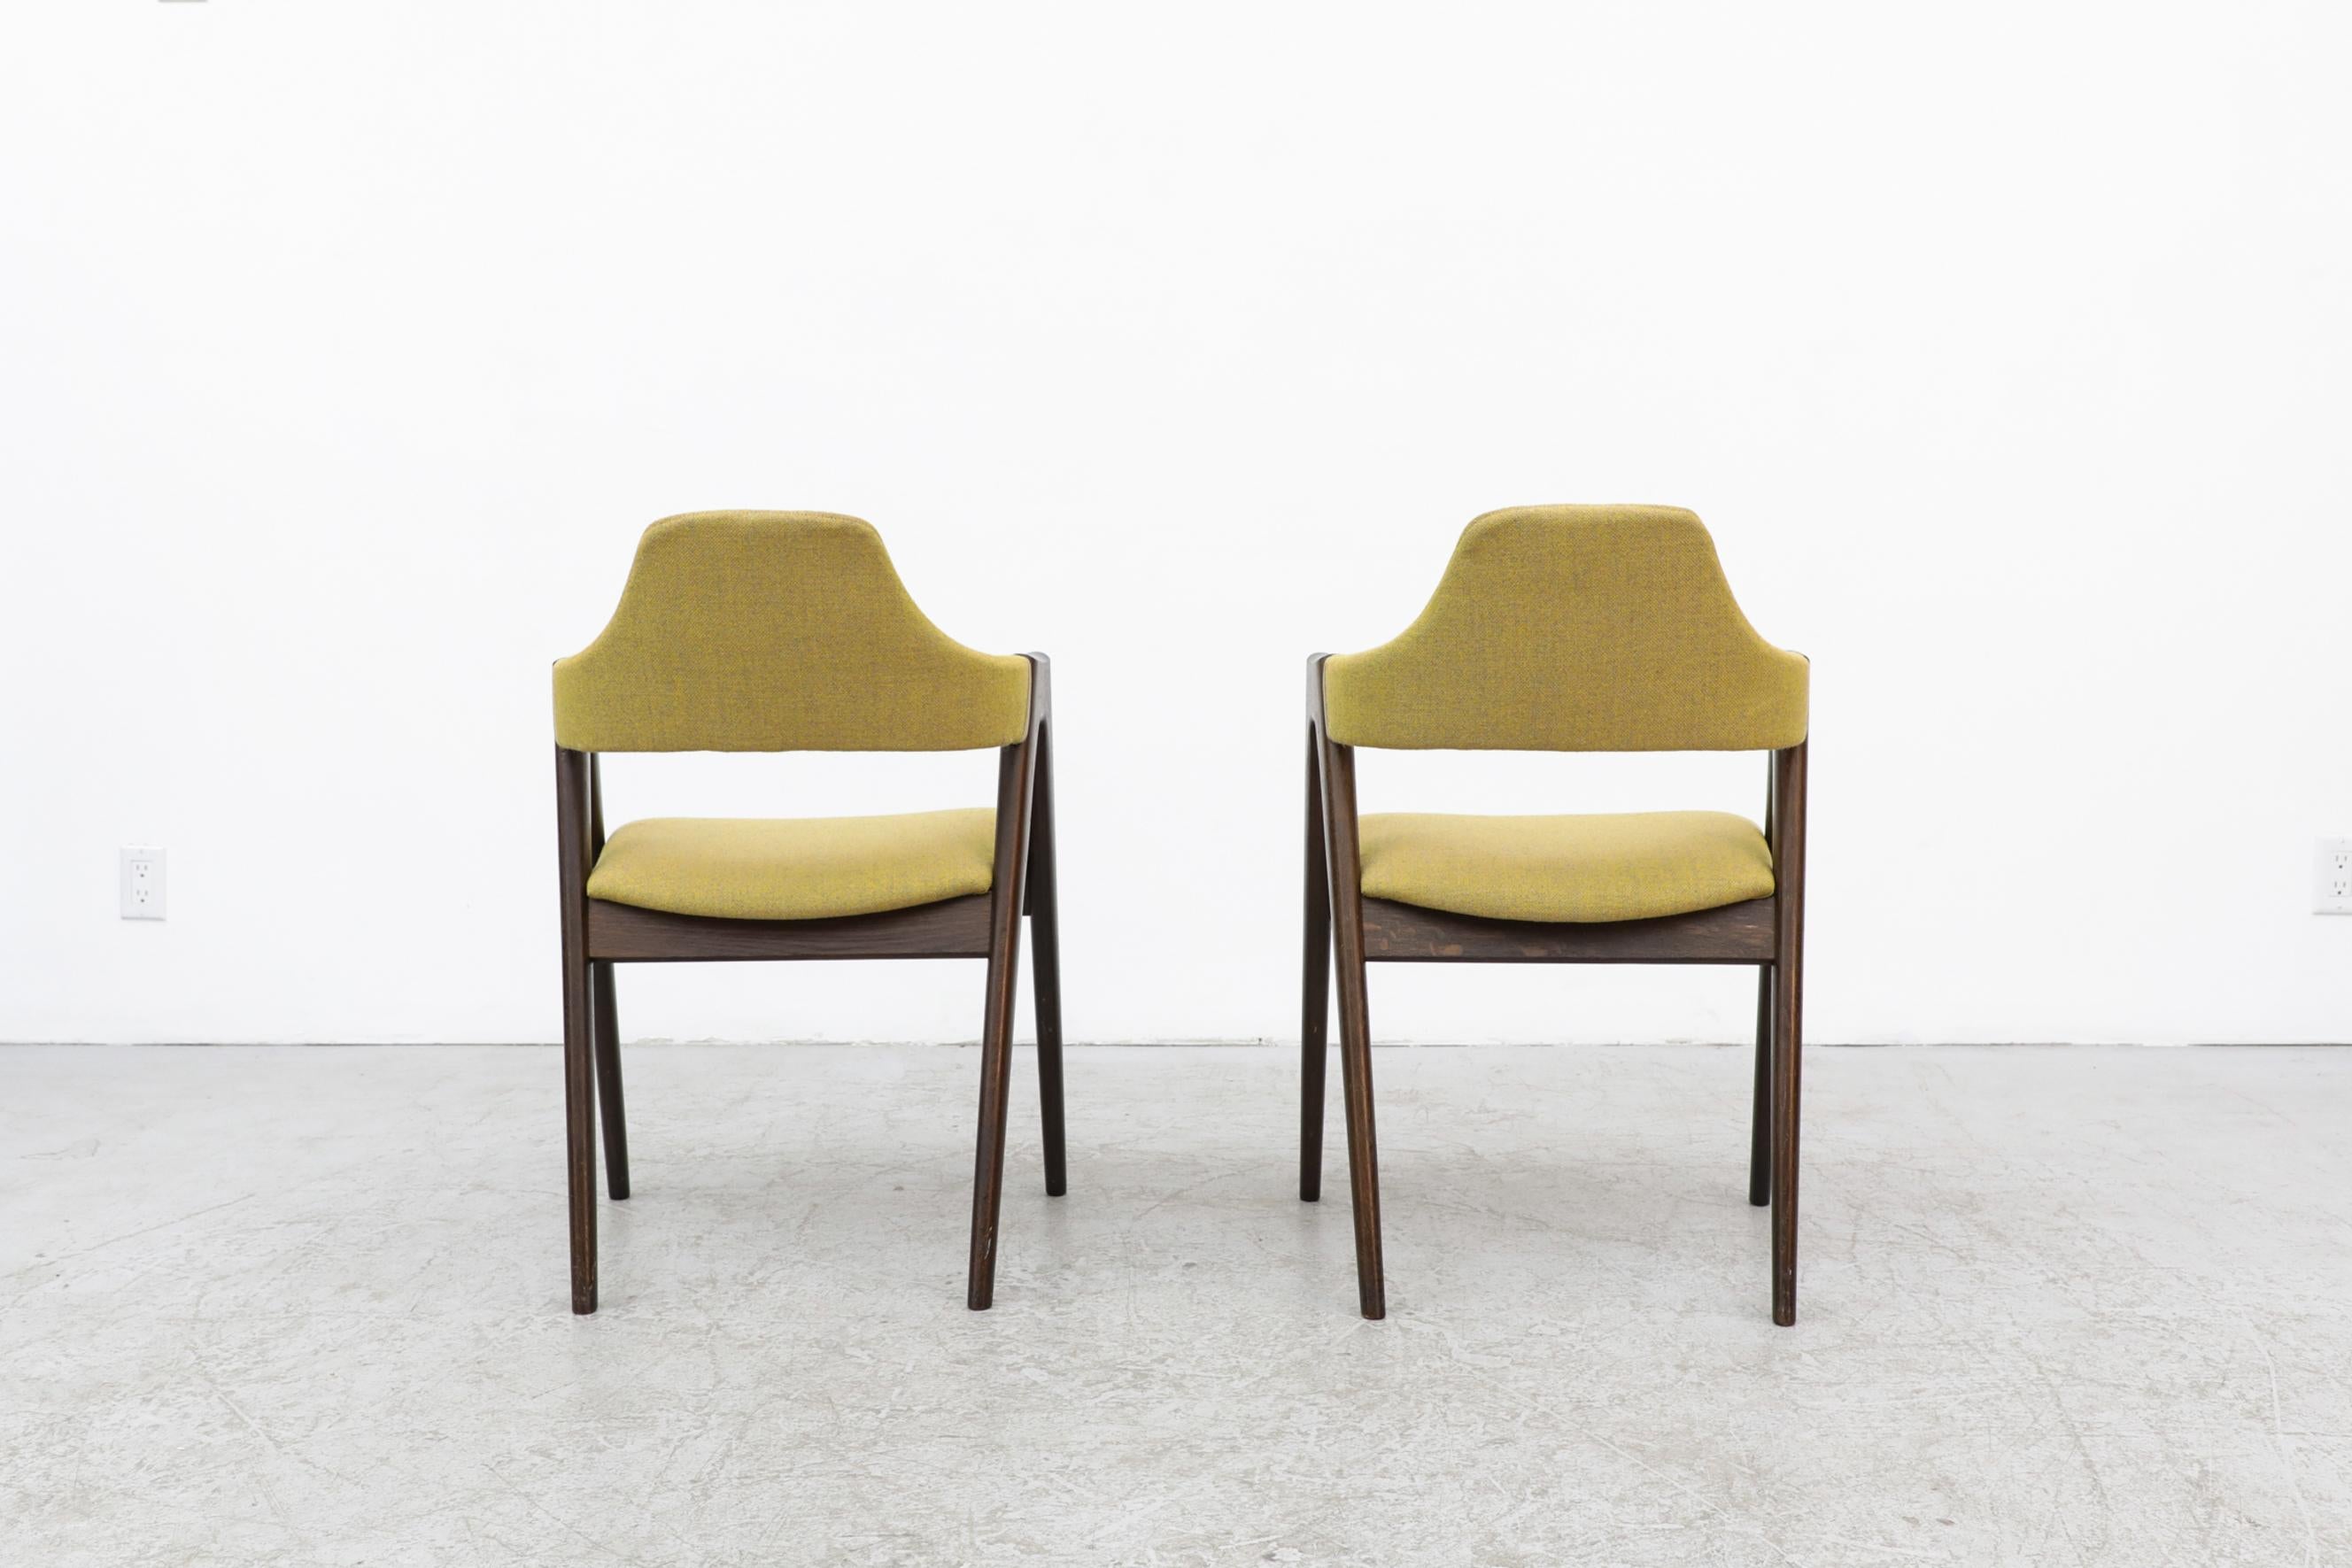 Mid-20th Century Pair of Kai Kristiansen Dark Stained Wood Framed Compass Chairs in Kiwi Fabric